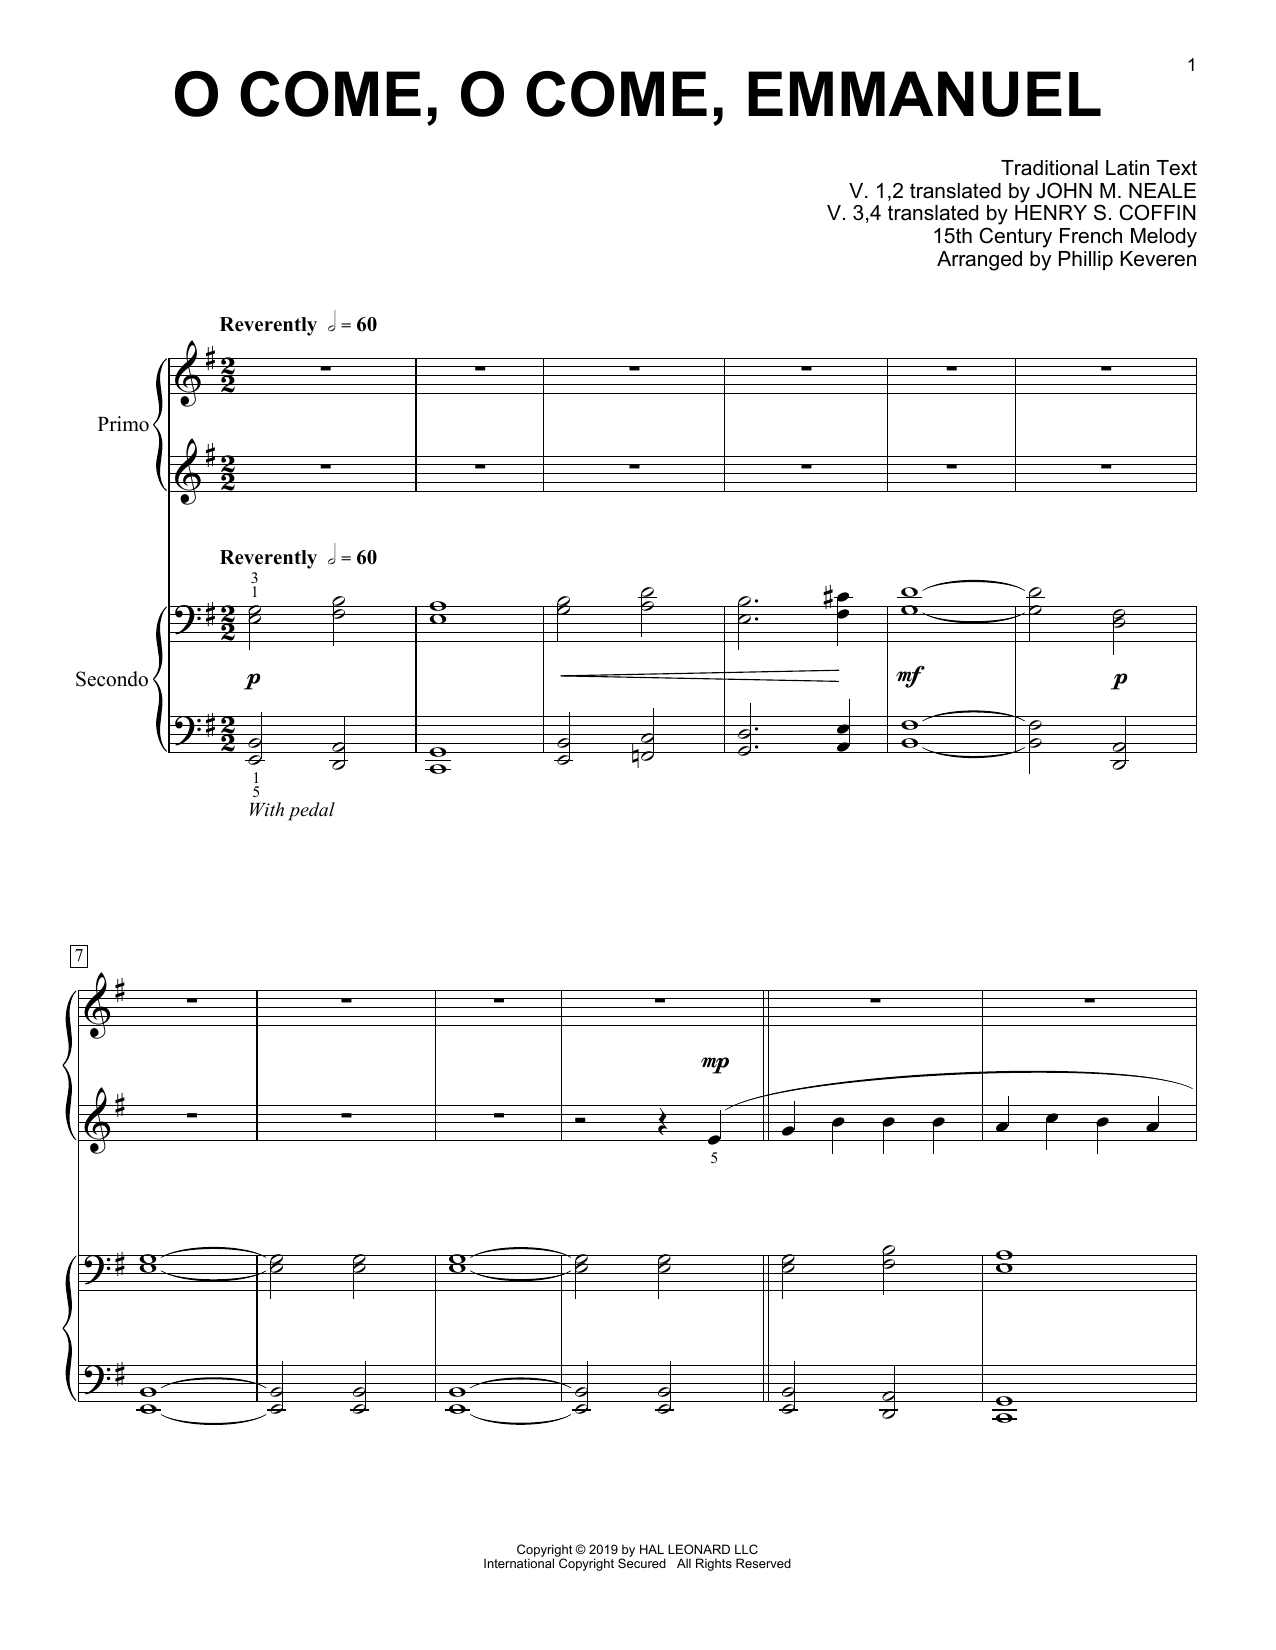 15th Century French Melody O Come, O Come, Emmanuel (arr. Phillip Keveren) sheet music notes and chords. Download Printable PDF.